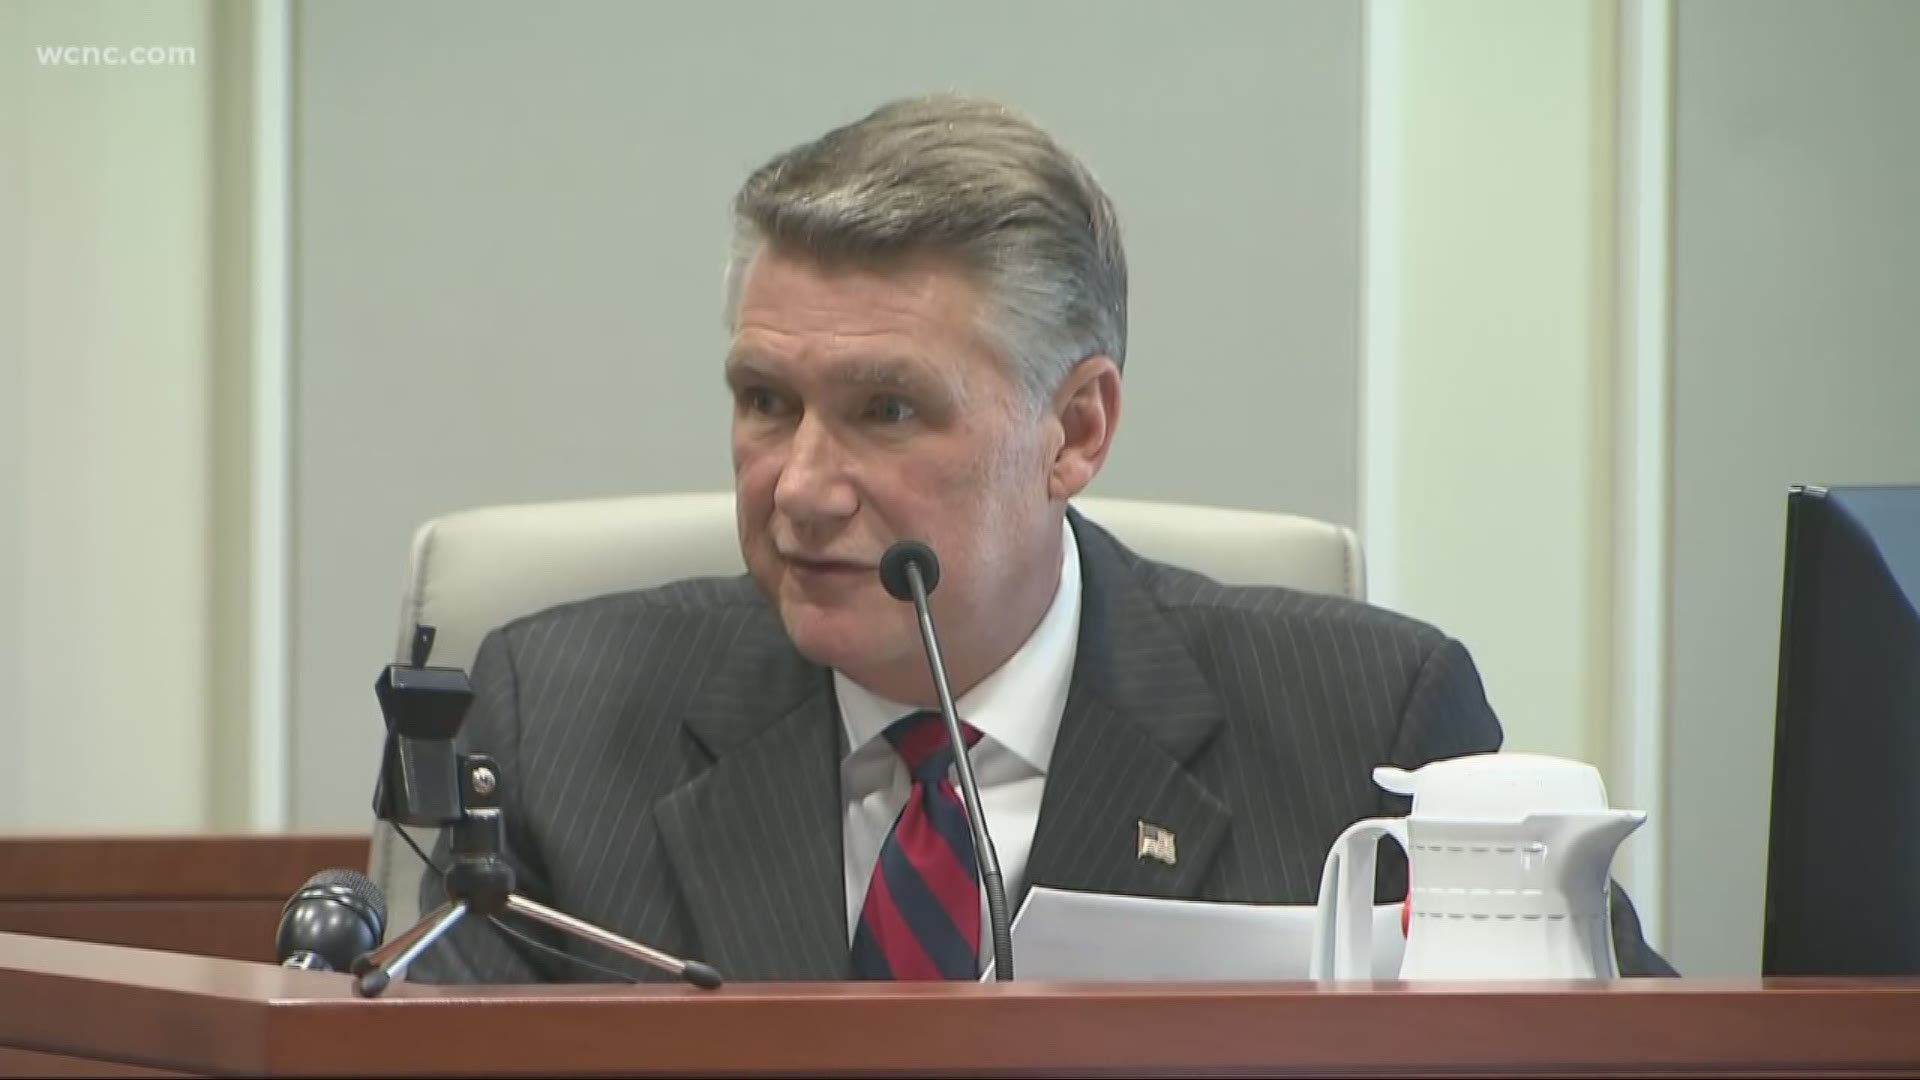 Mark Harris, the Republican who called for a new election last week after ballot fraud allegations, said today he will not run. So far, Democrat Dan McCready the only candidate officially in the race.